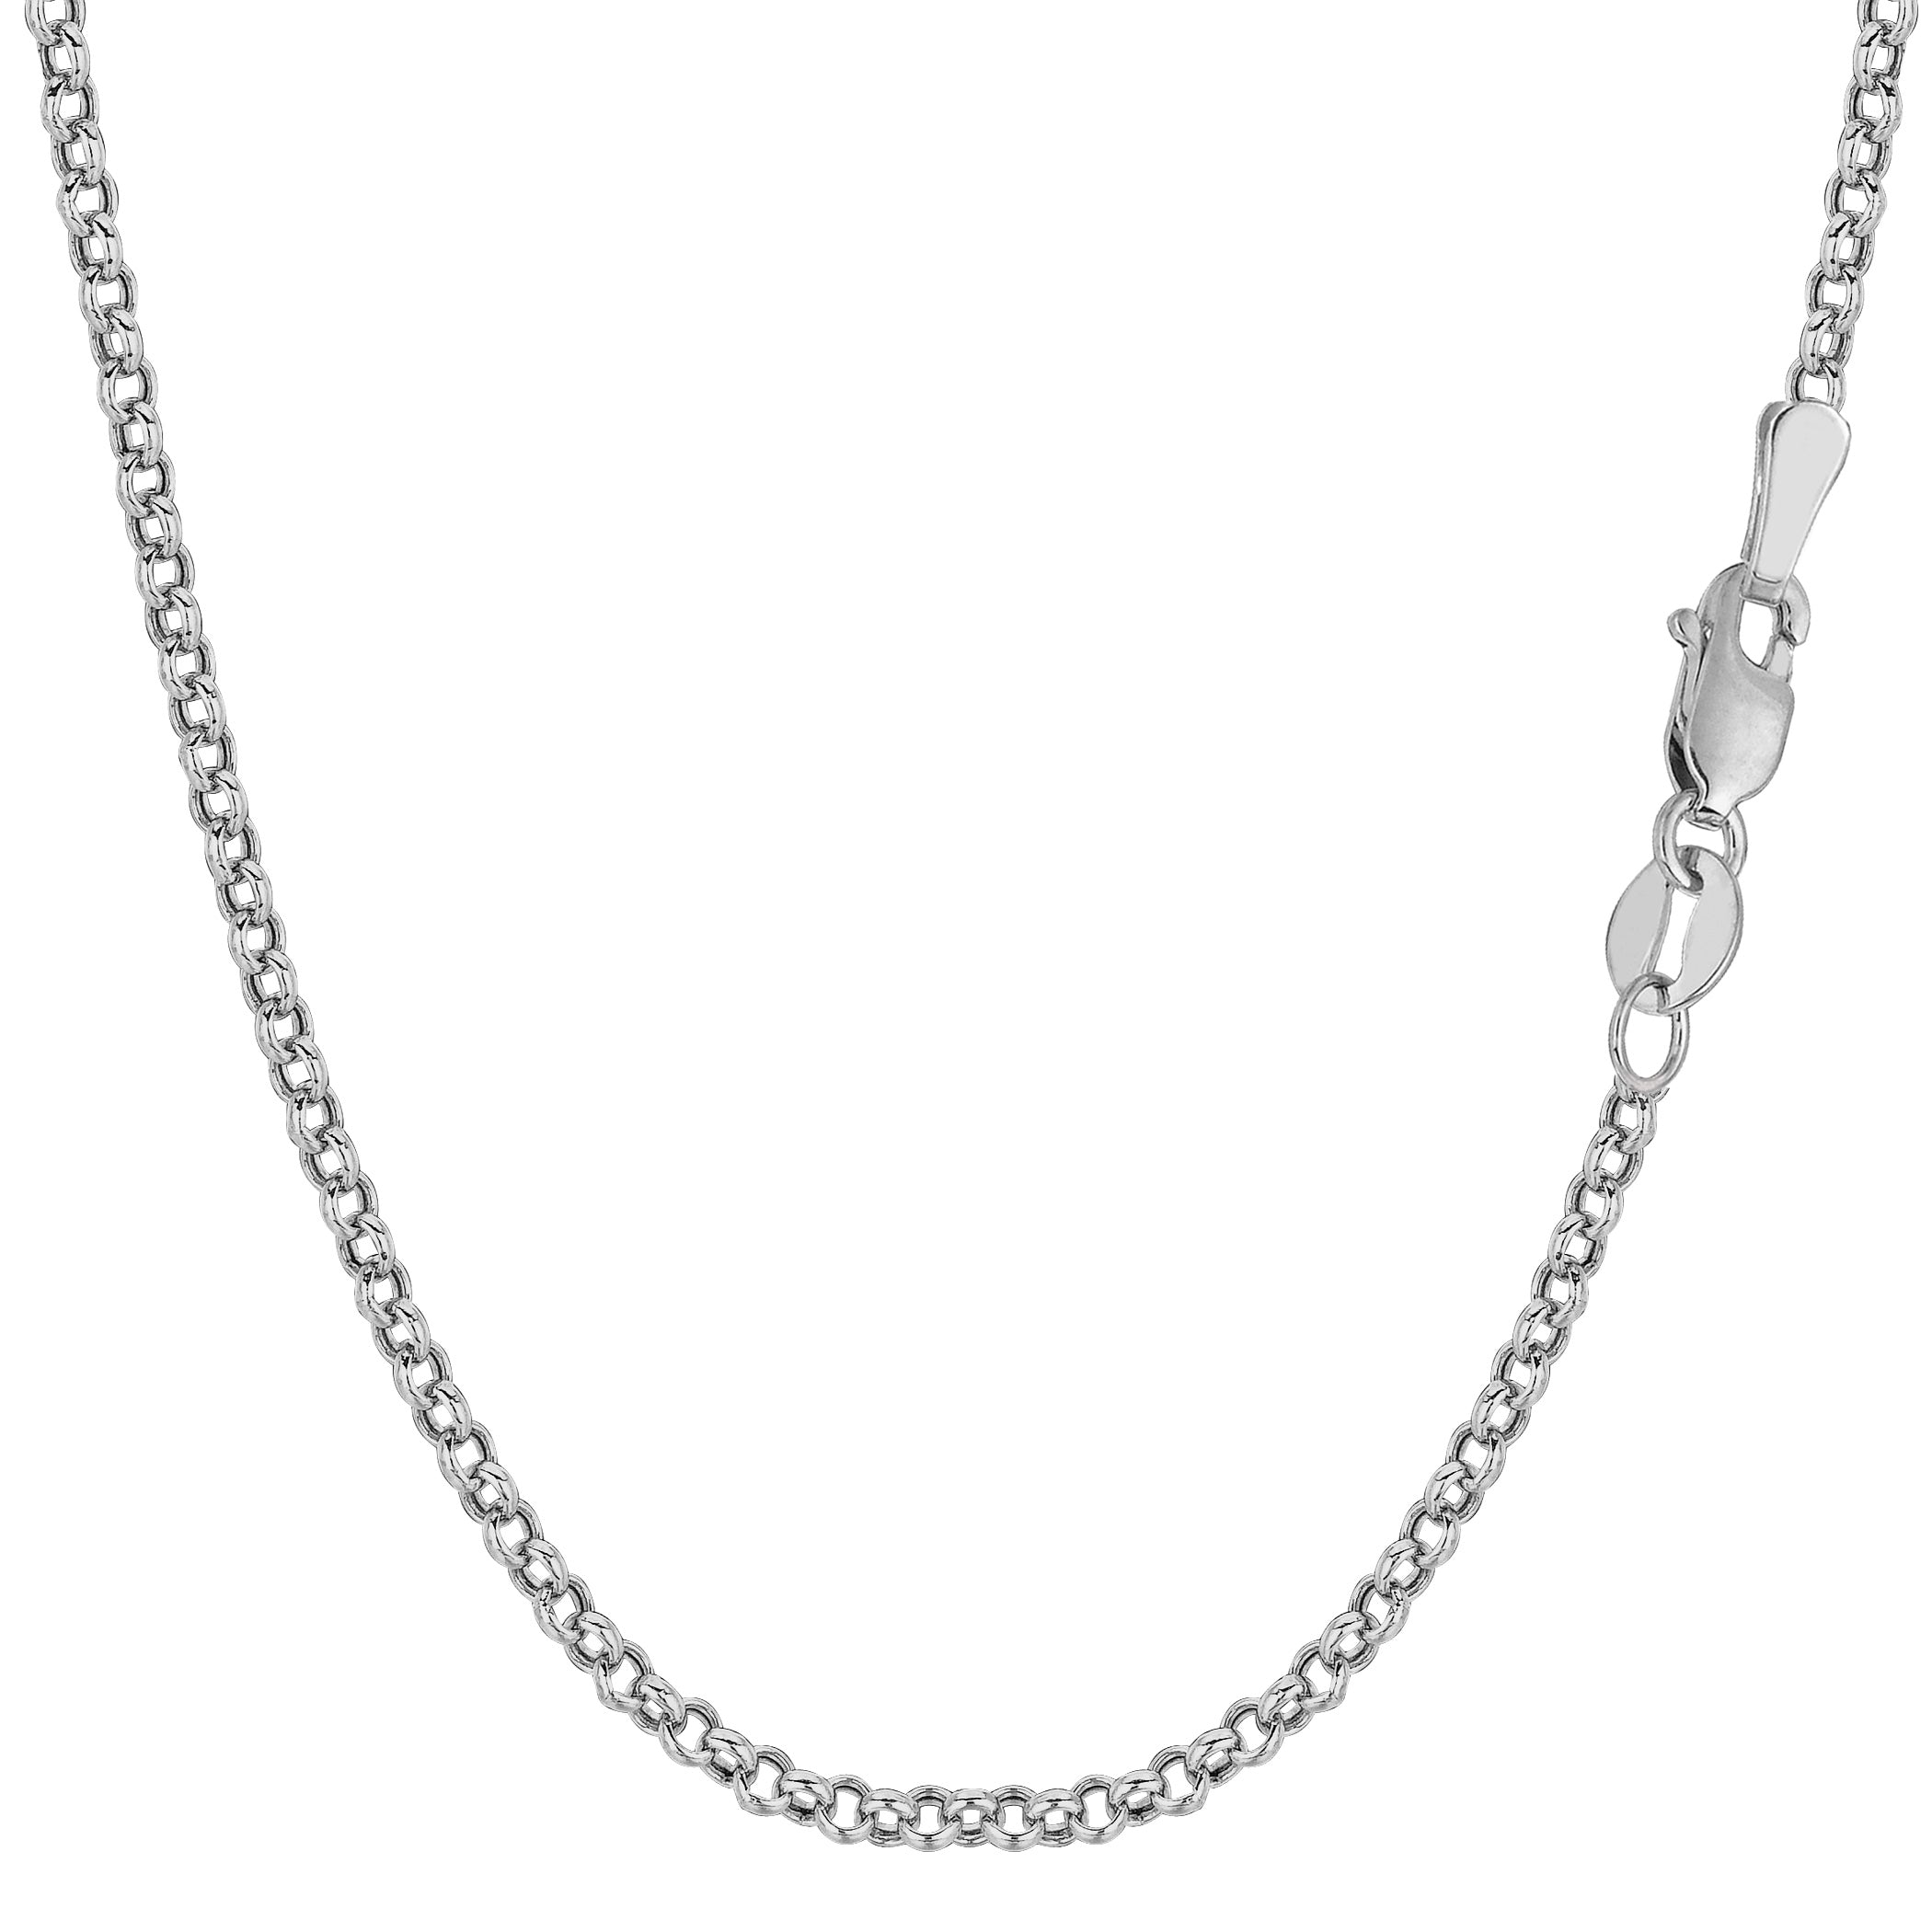 10k White Gold Round Rolo Link Chain Necklace, 2.3mm fine designer jewelry for men and women